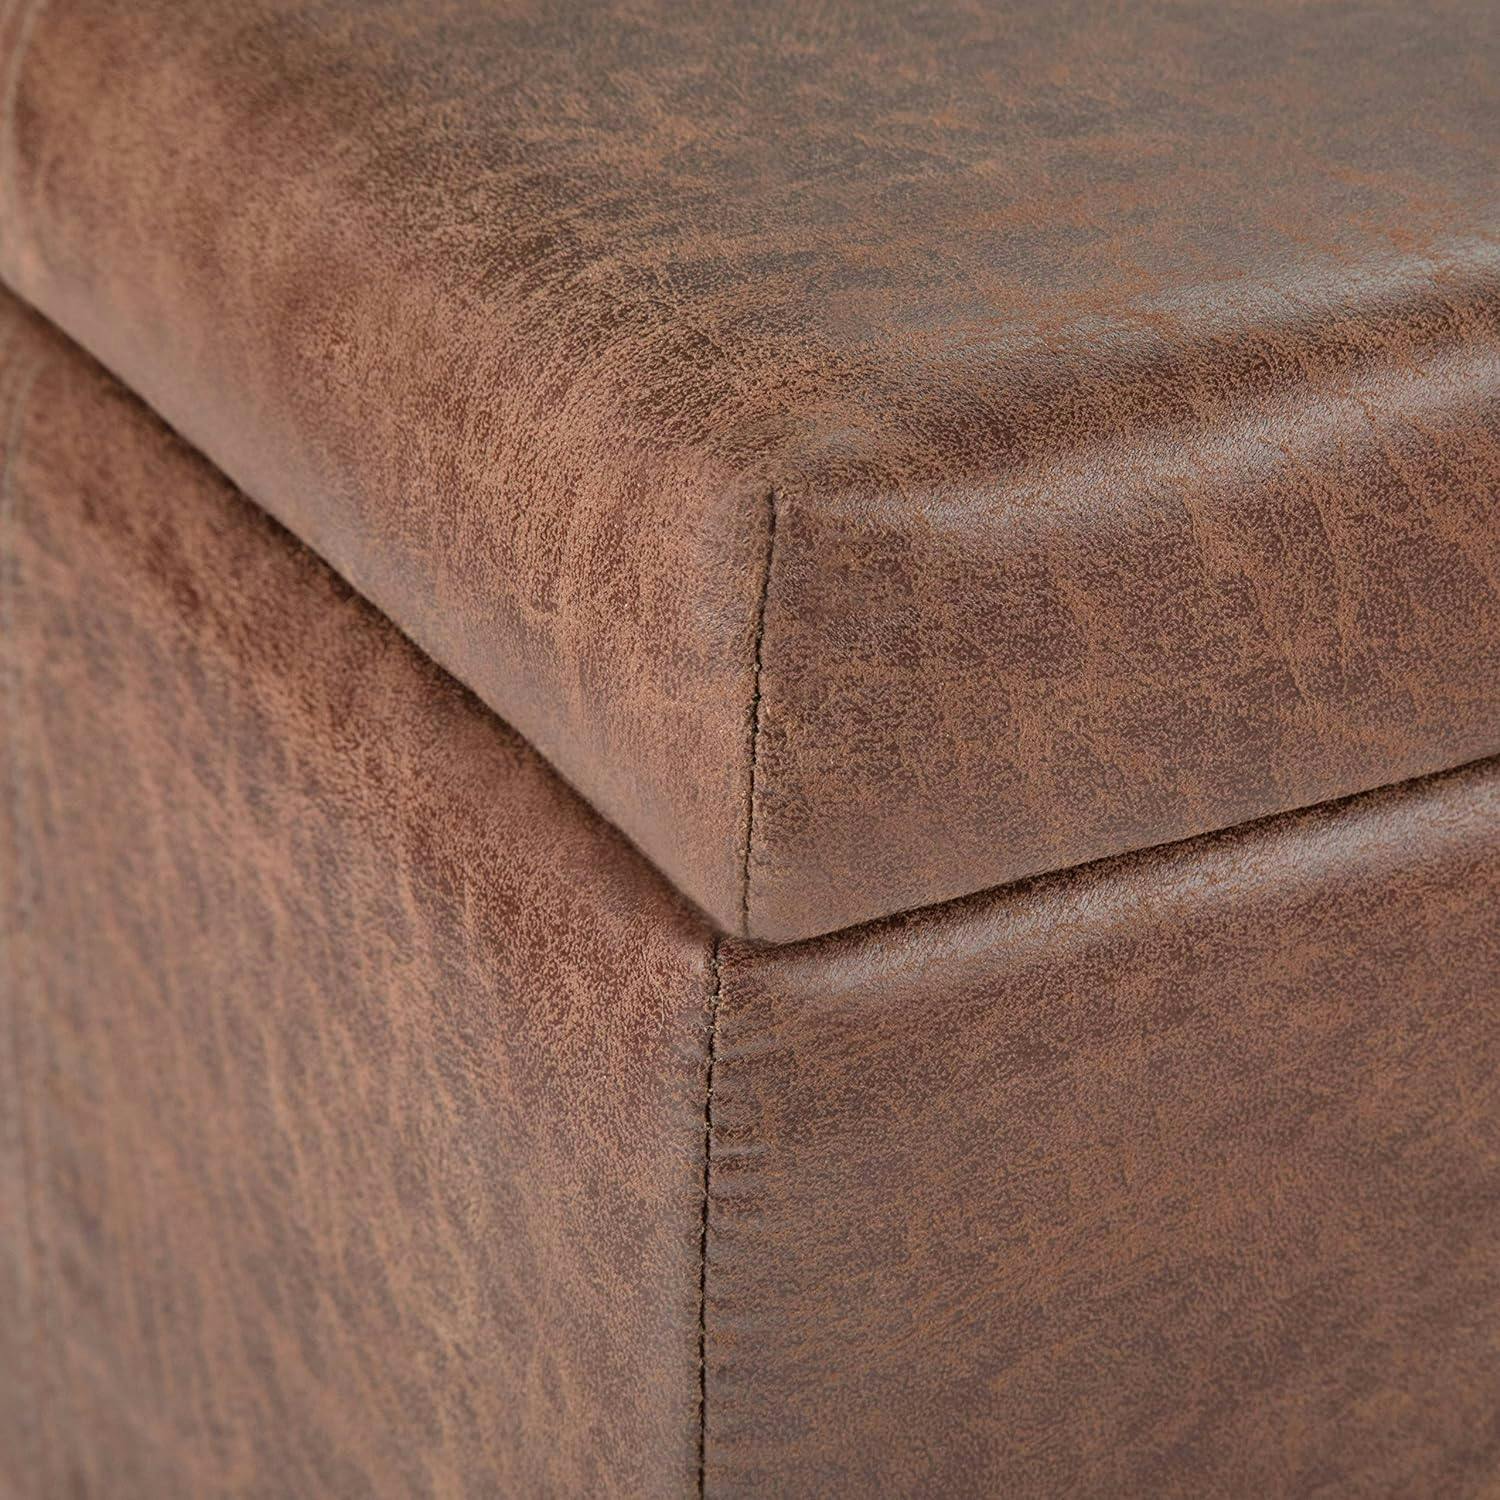 Dover Distressed Umber Brown Faux Leather Lift-Top Storage Ottoman